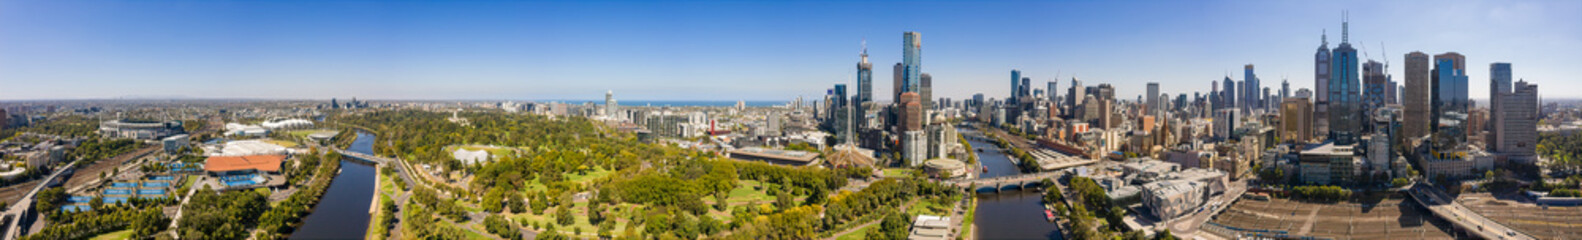 Panoramic view of the beautiful city of Melbourne as captured from above the Yarra river on a...